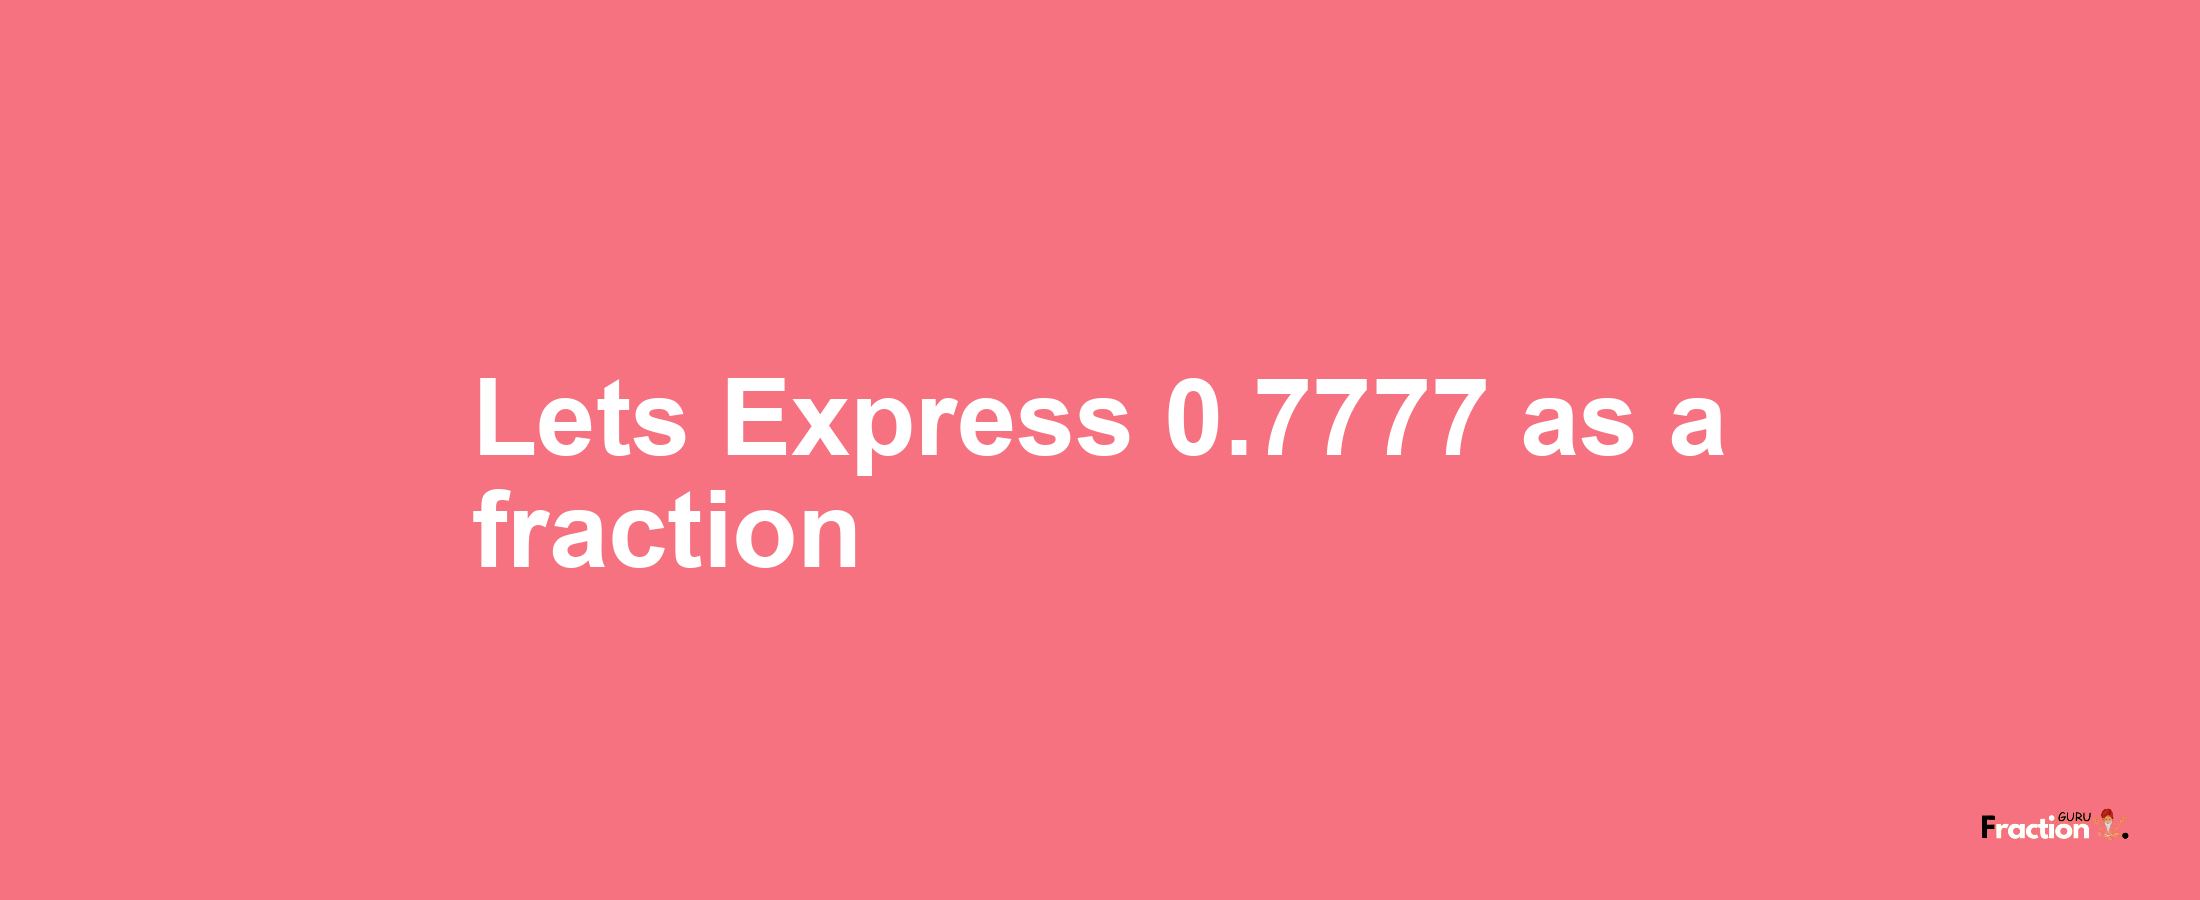 Lets Express 0.7777 as afraction